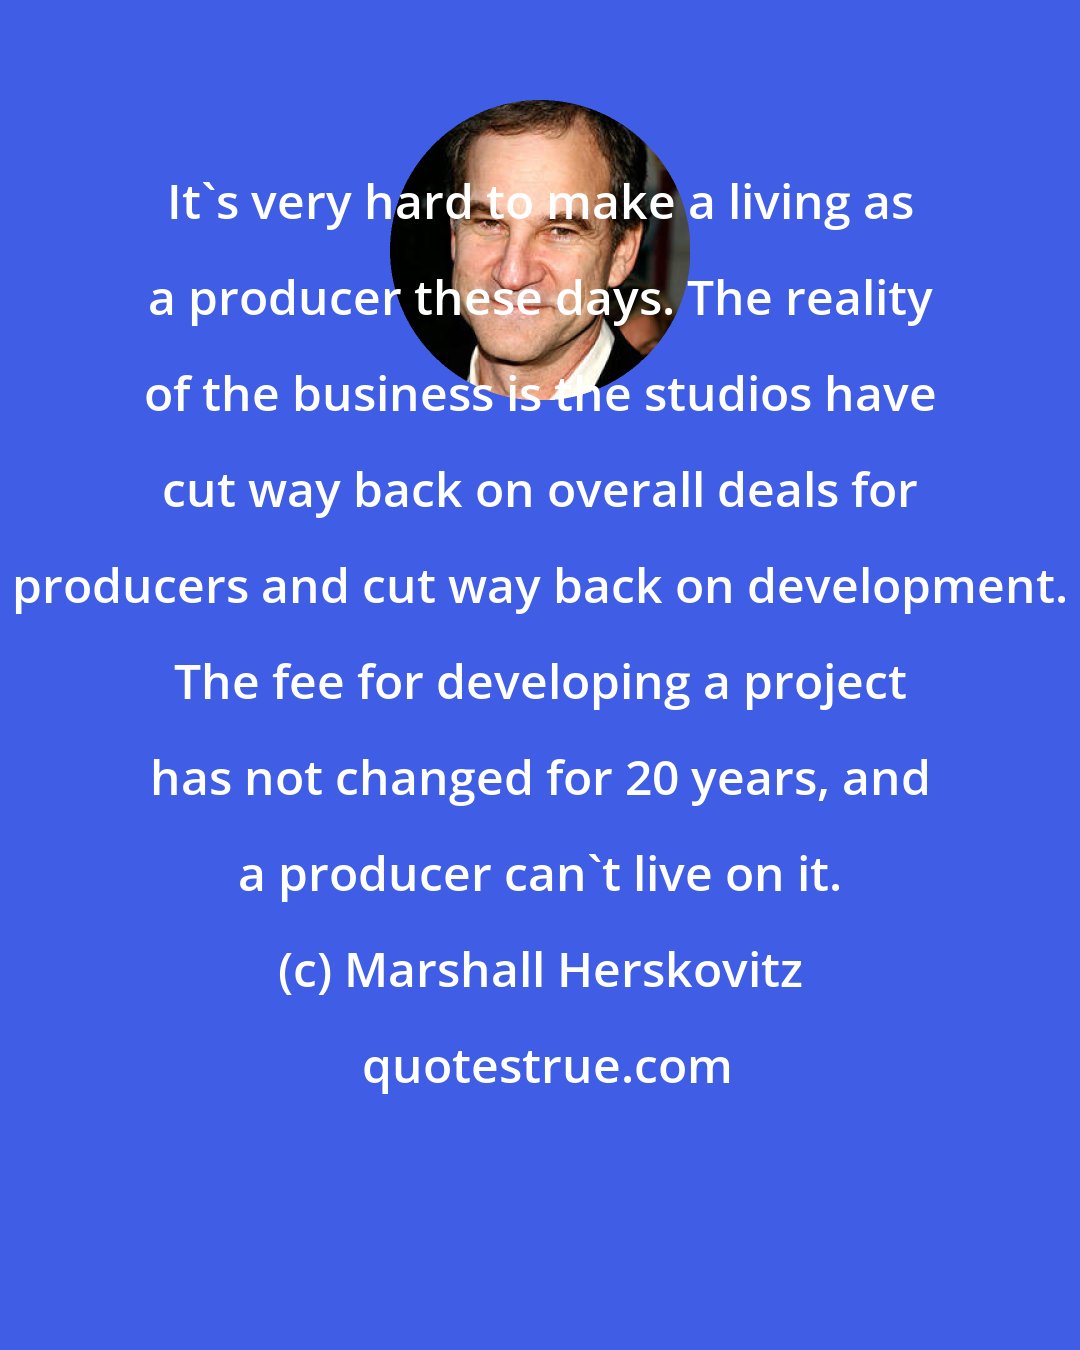 Marshall Herskovitz: It's very hard to make a living as a producer these days. The reality of the business is the studios have cut way back on overall deals for producers and cut way back on development. The fee for developing a project has not changed for 20 years, and a producer can't live on it.